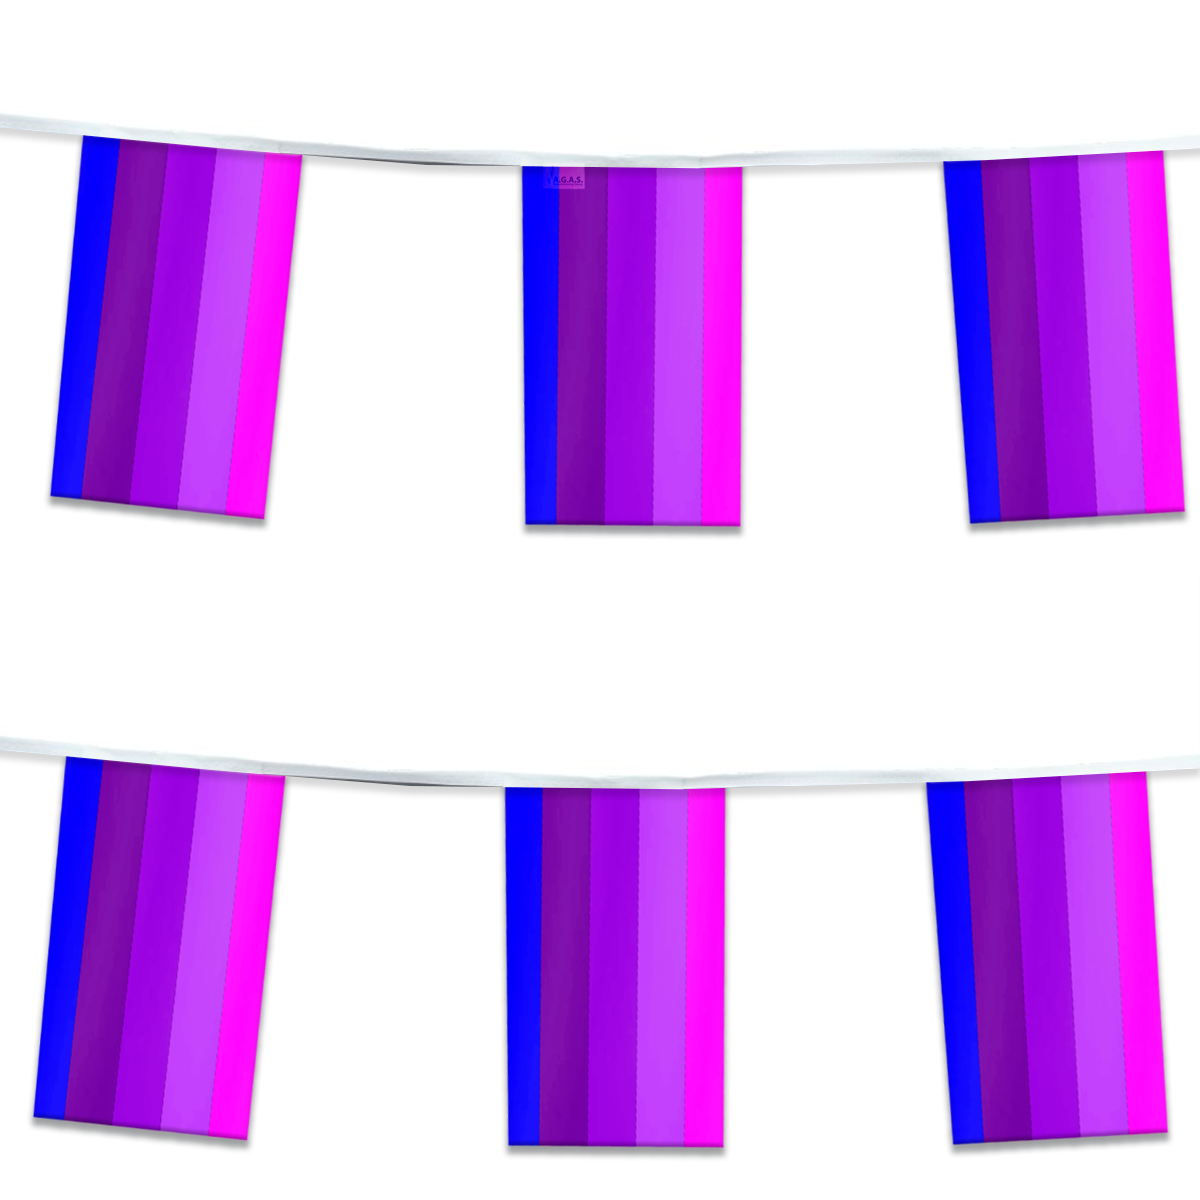 AGAS Transexual Alt Streamers for Party 60 Ft long - 5 Mil Plastic